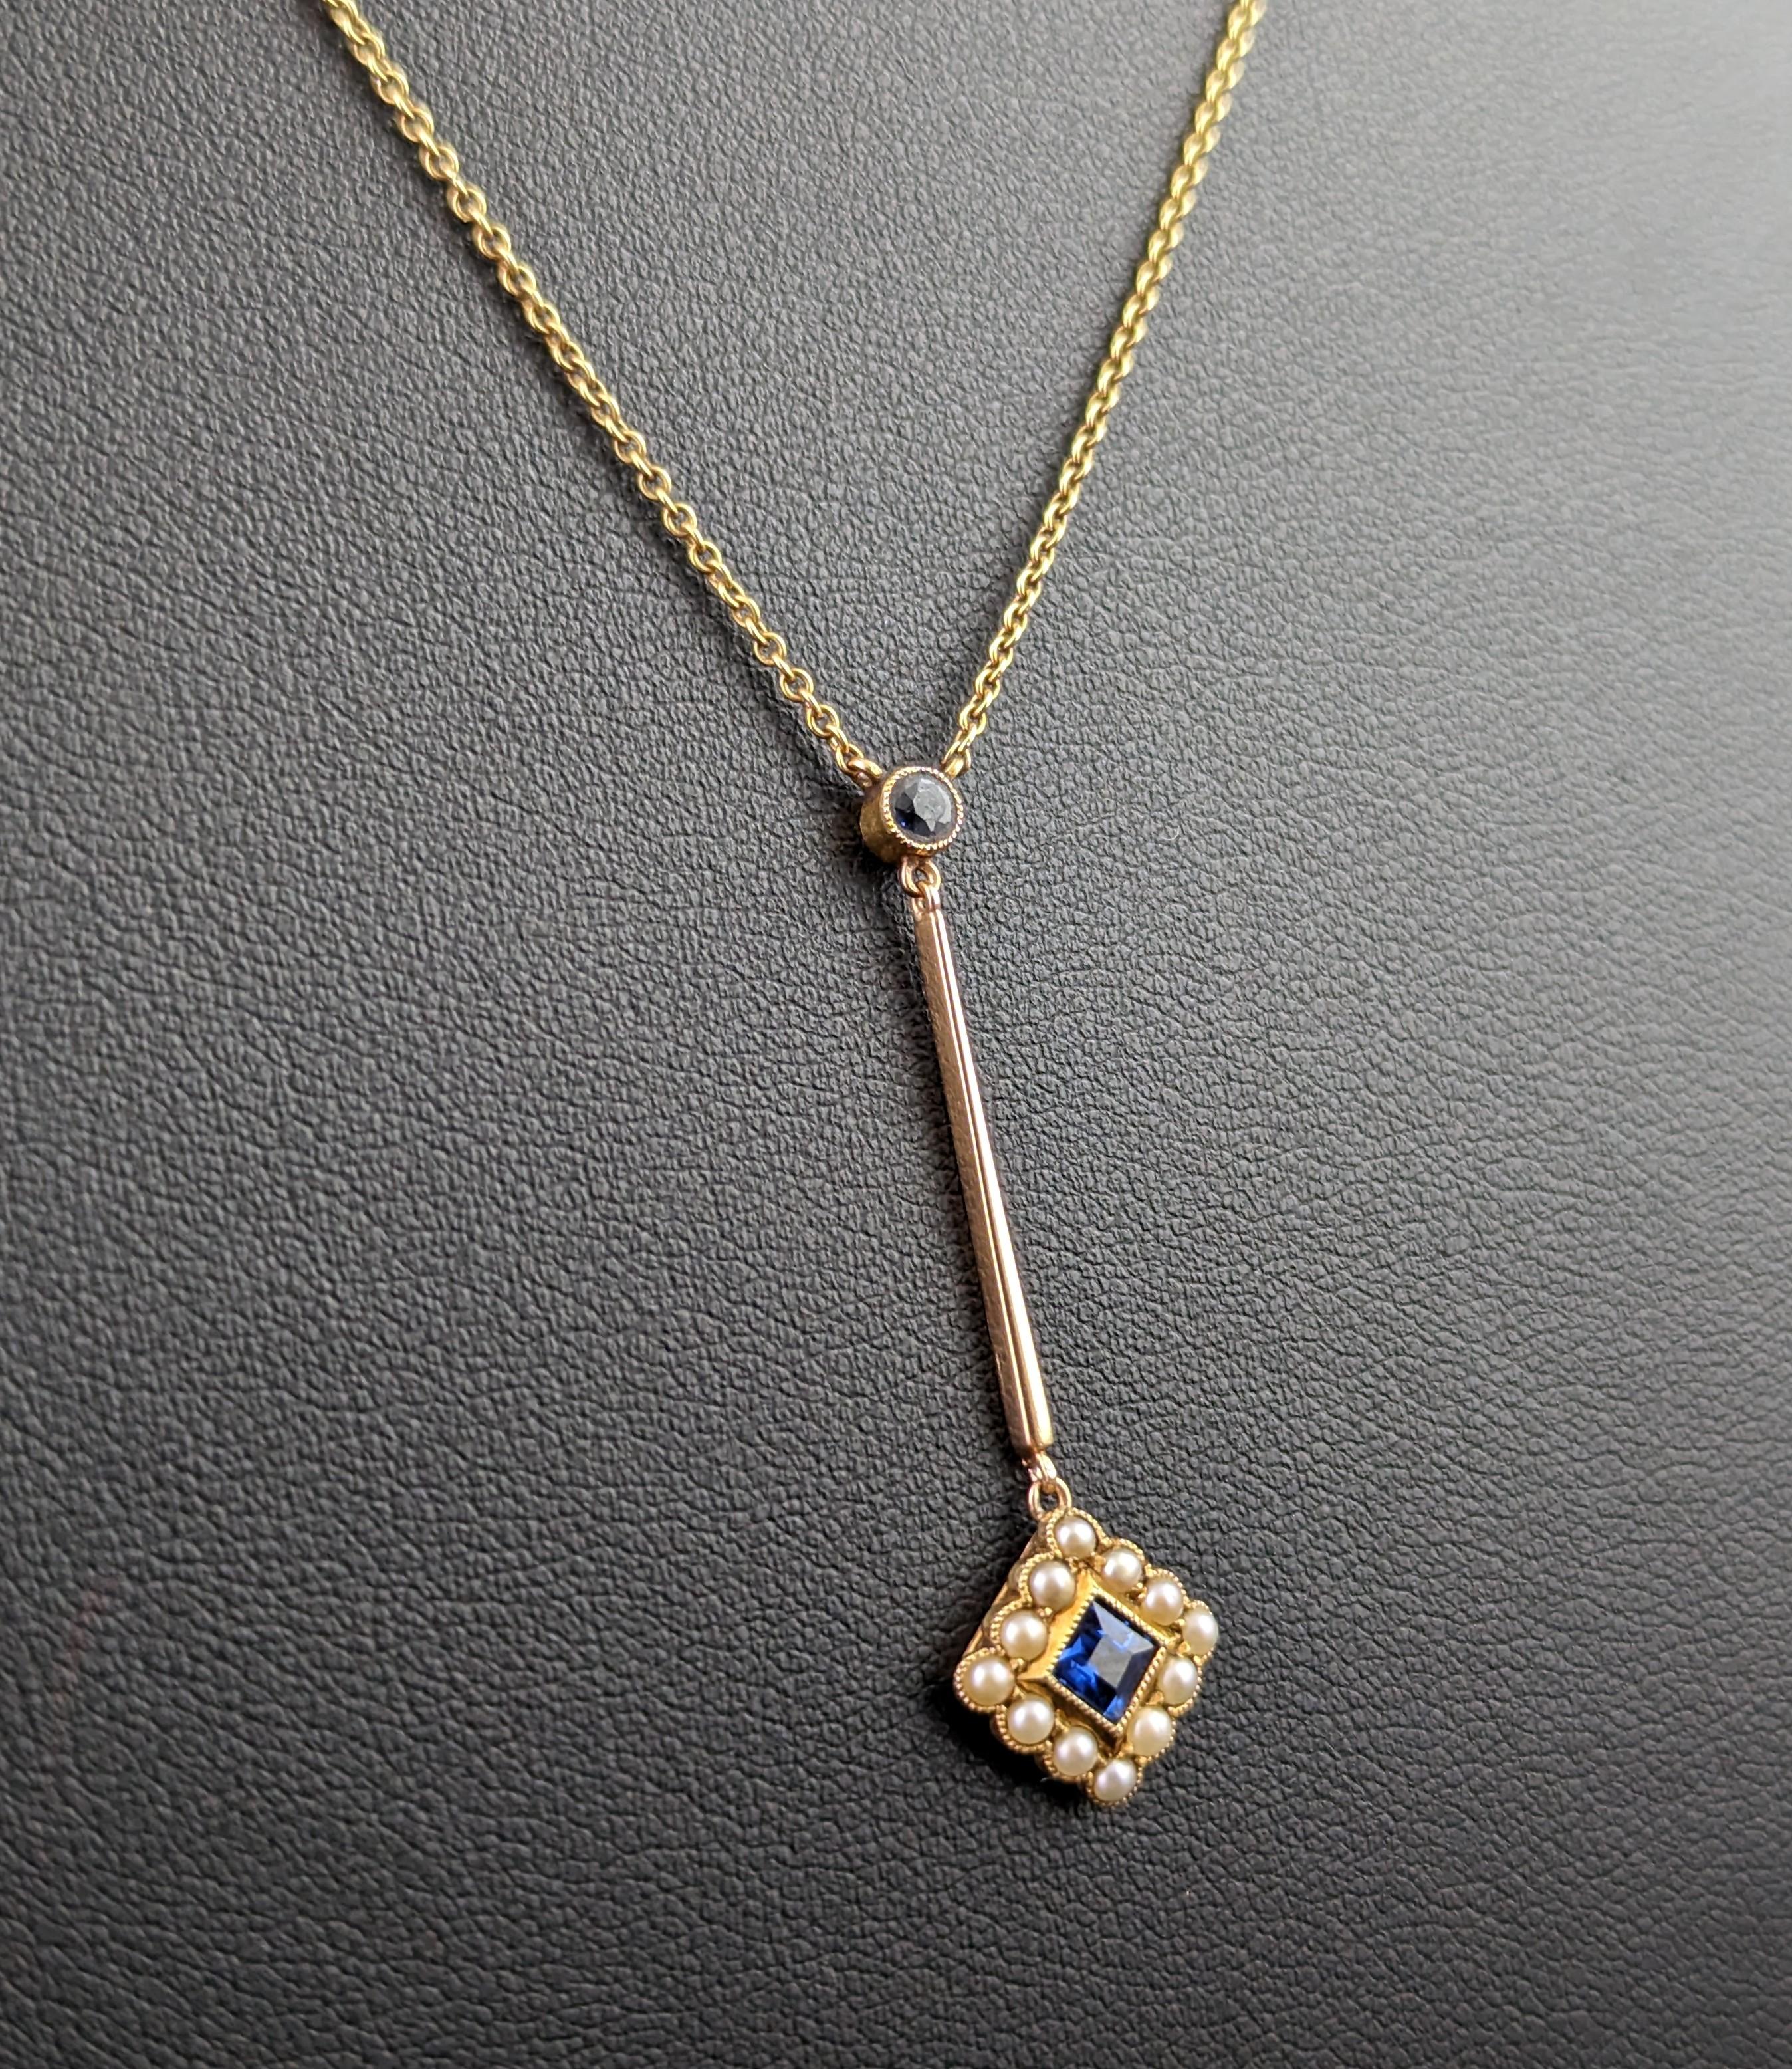 Antique Sapphire and Pearl drop pendant necklace, 15k yellow gold  4